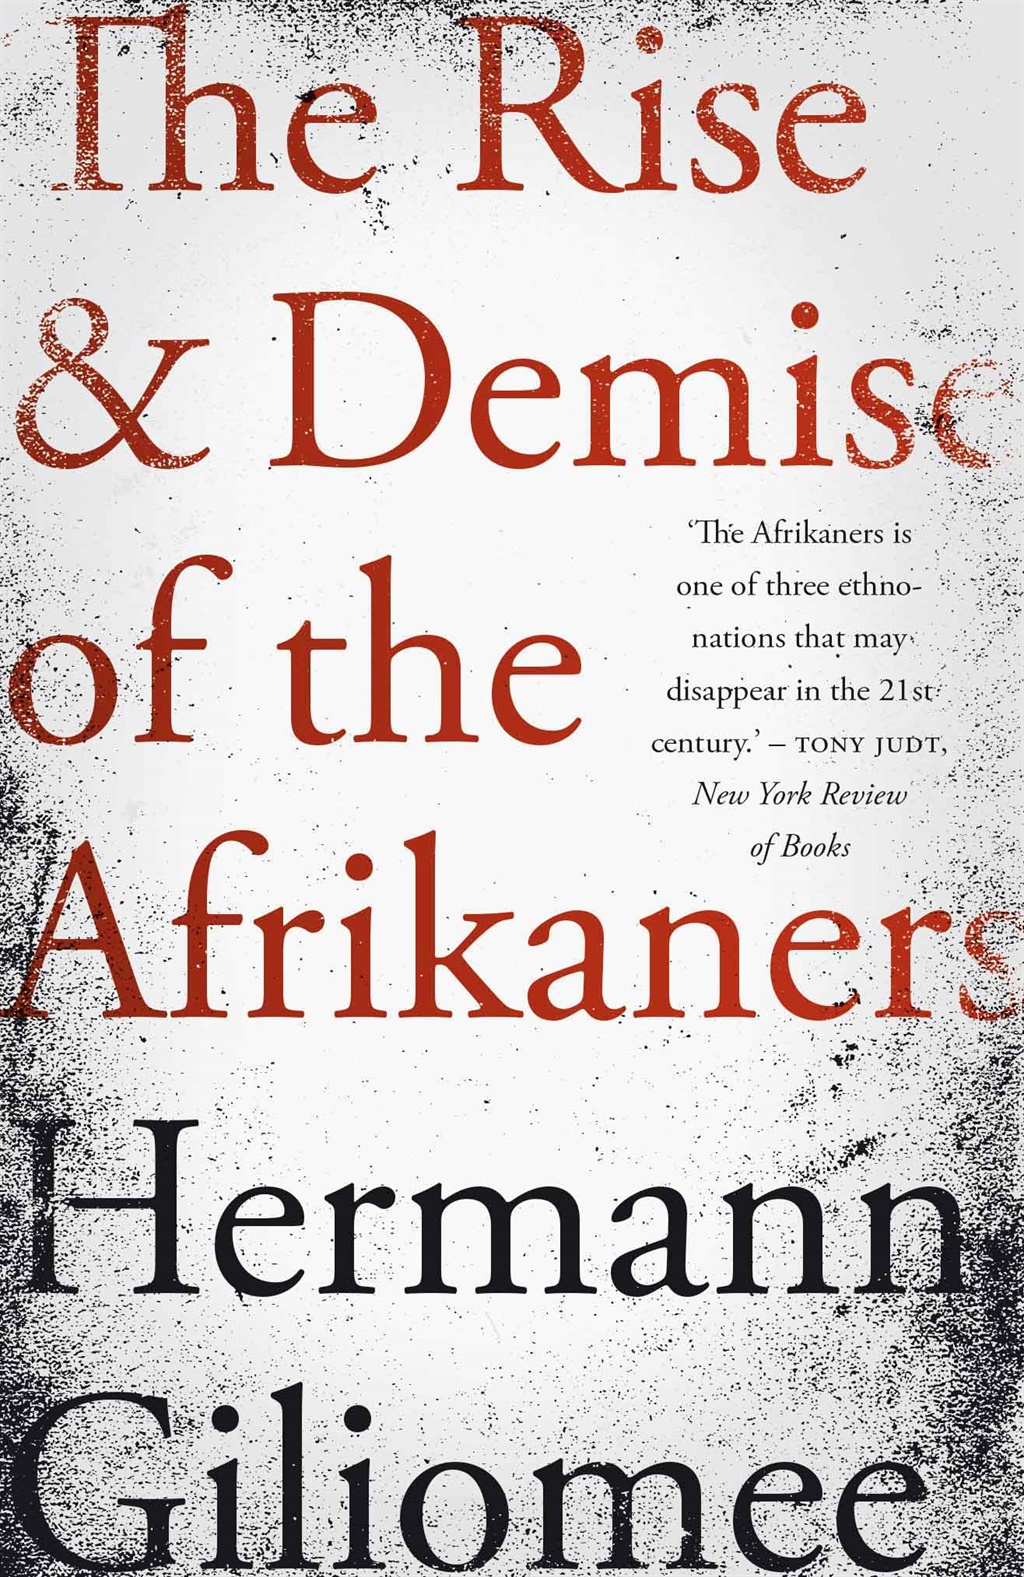 The rise and demise of the Afrikaners by Hermann Giliomee (Tafelberg).